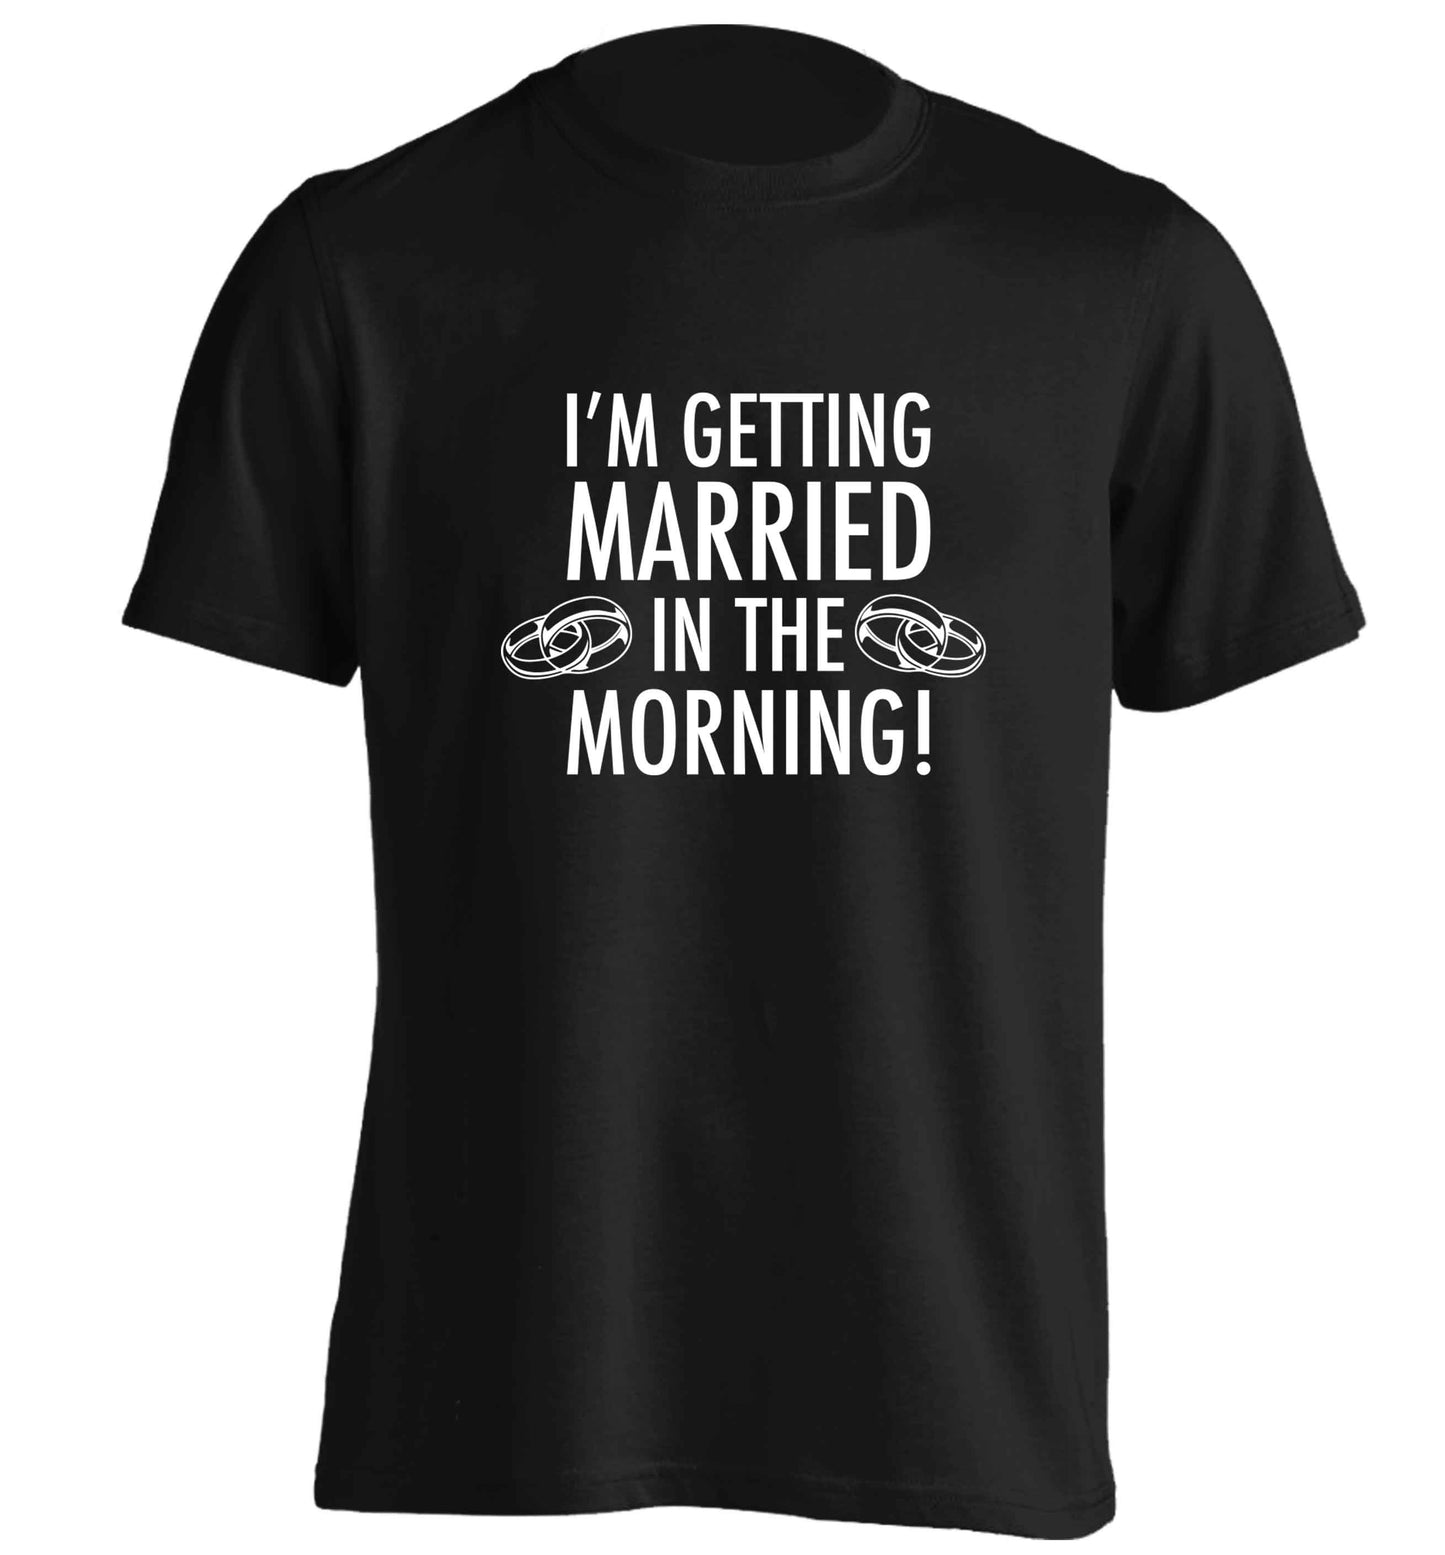 I'm getting married in the morning! adults unisex black Tshirt 2XL